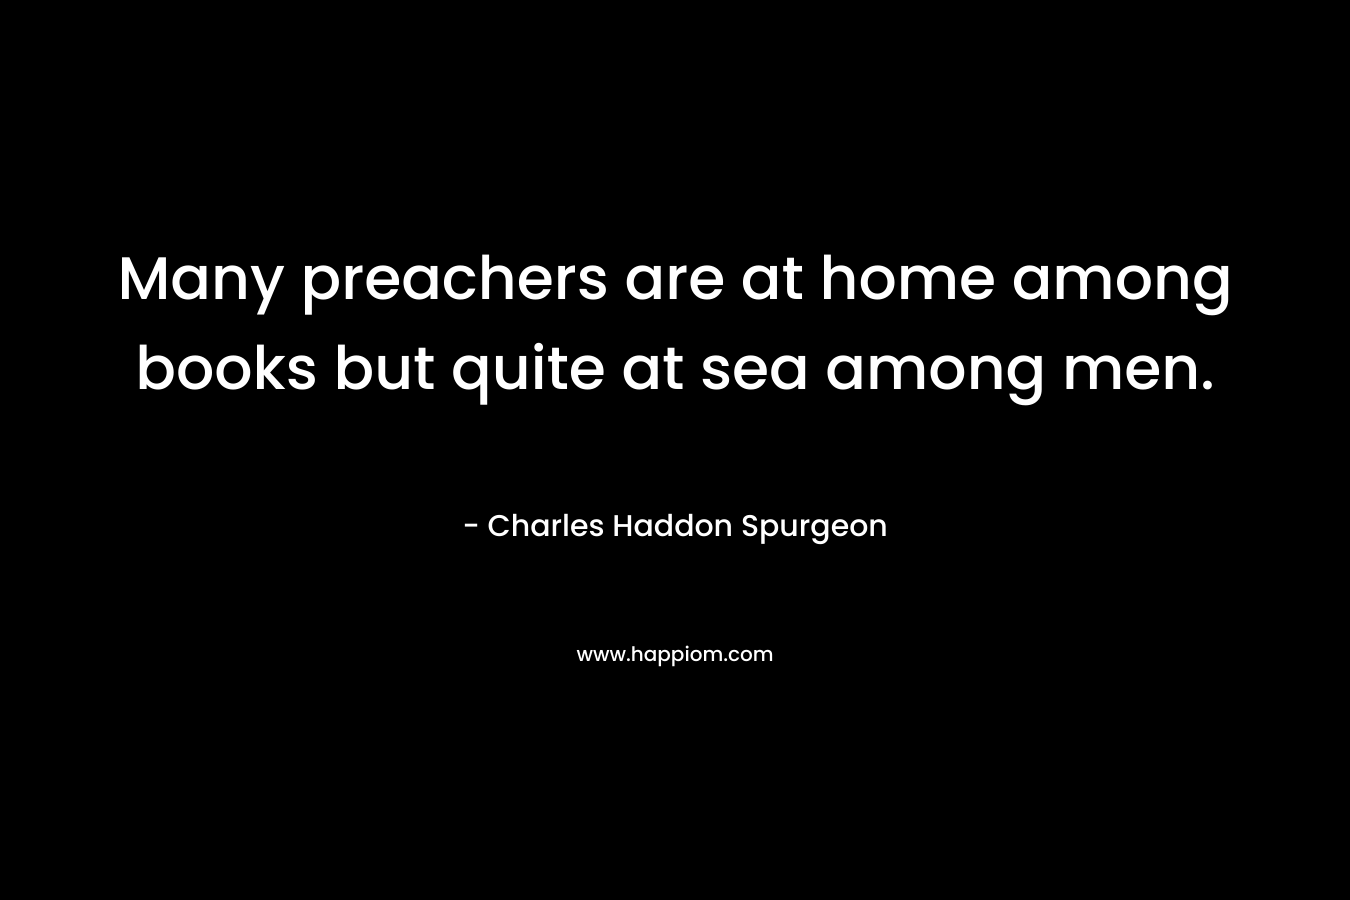 Many preachers are at home among books but quite at sea among men. – Charles Haddon Spurgeon